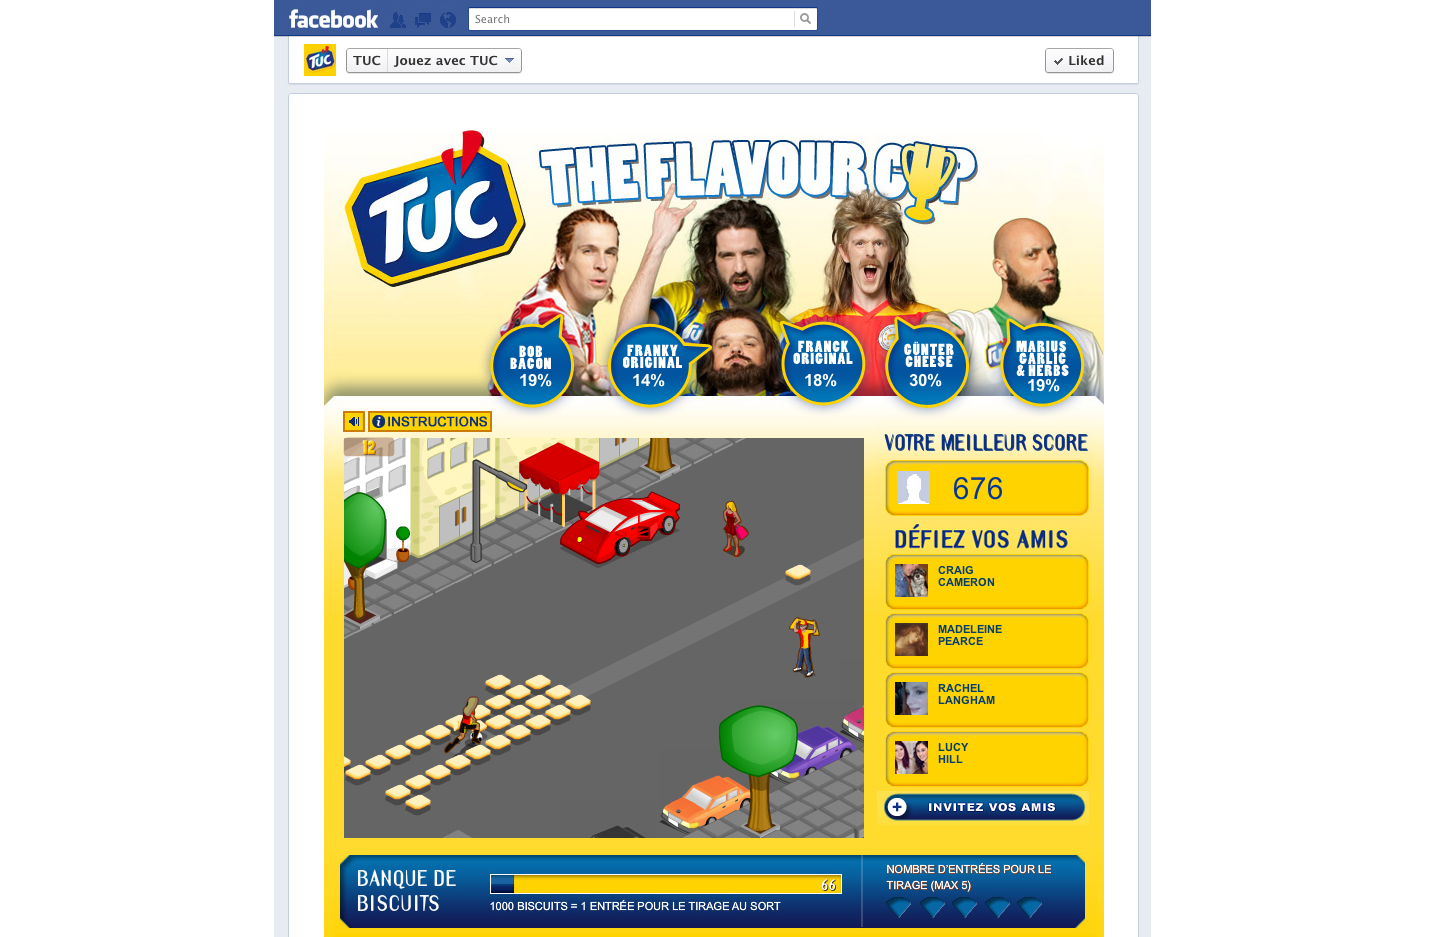 Draftfcb Launches TUC Campaign